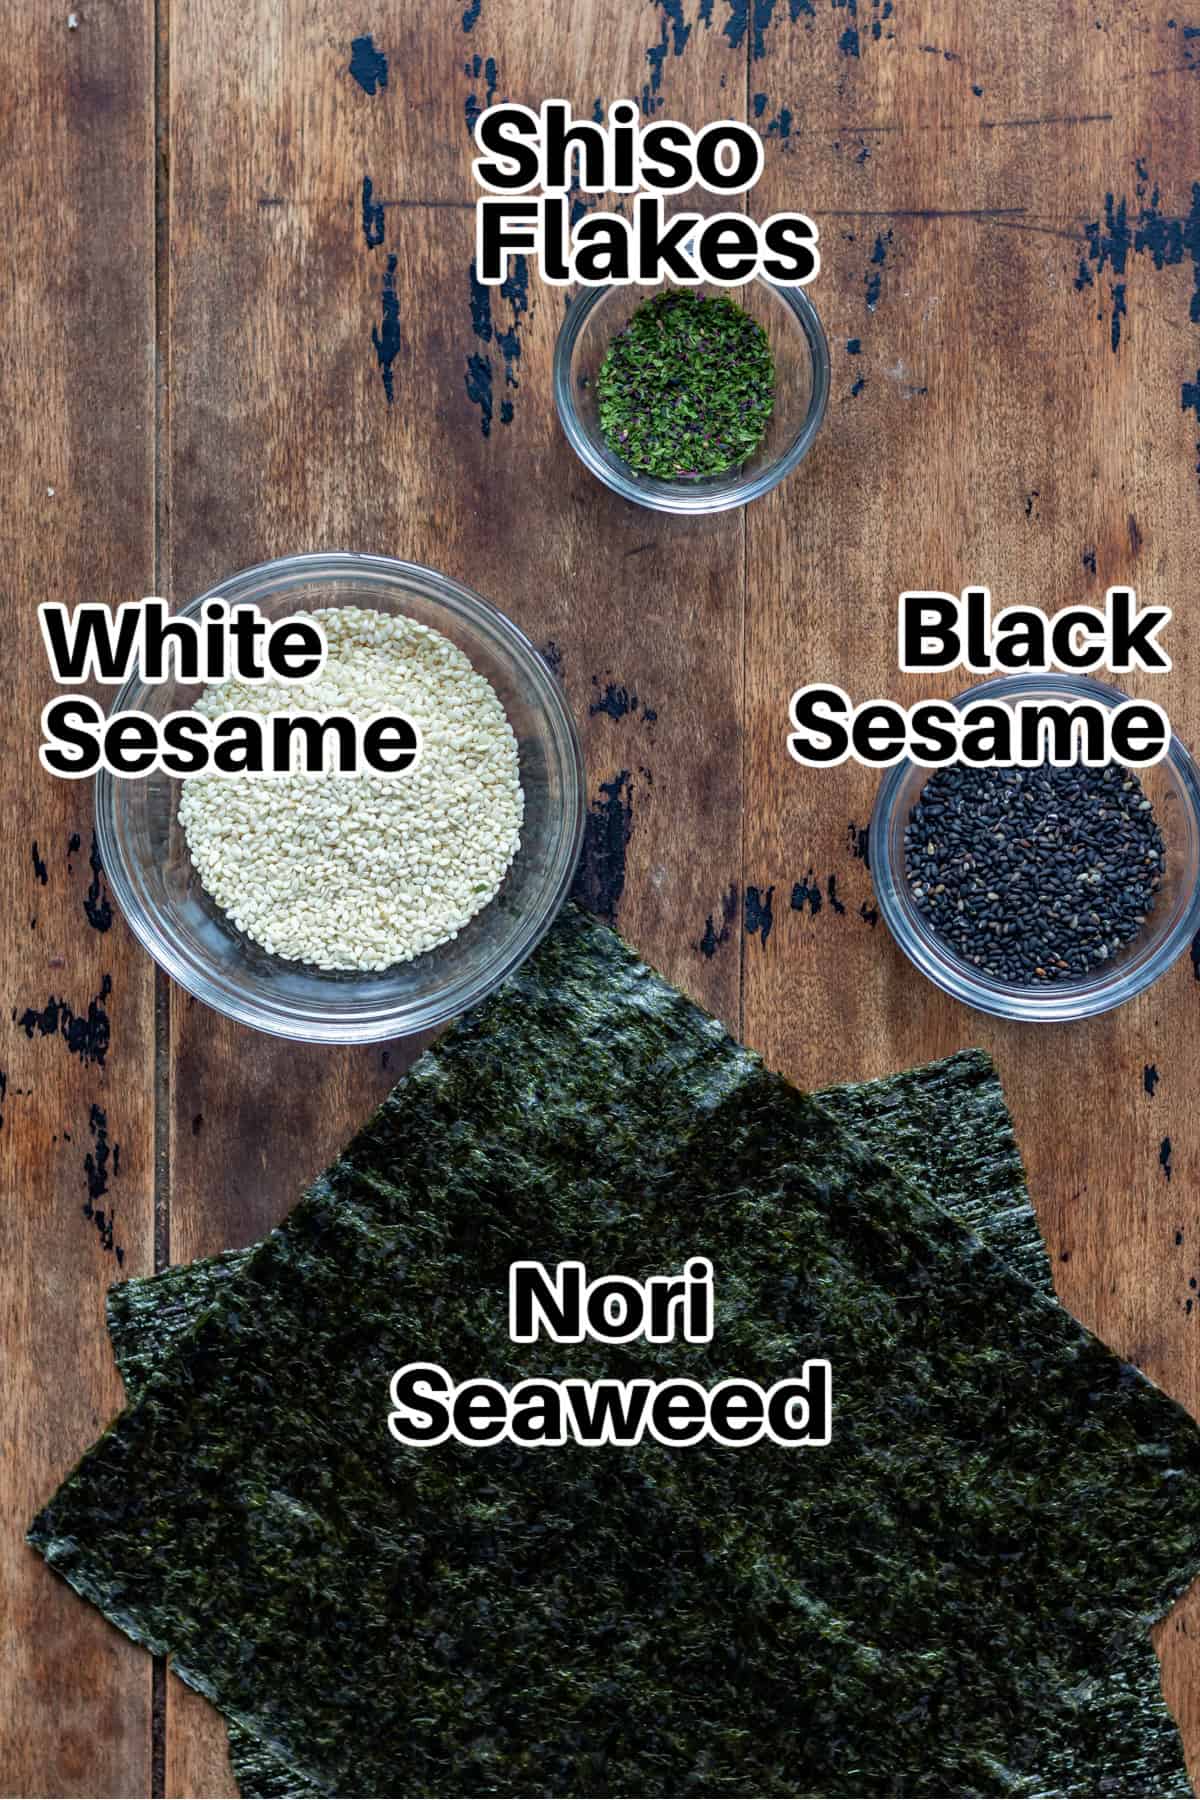 Labelled ingredients on a table: sesame seeds, nori, shiso flakes.